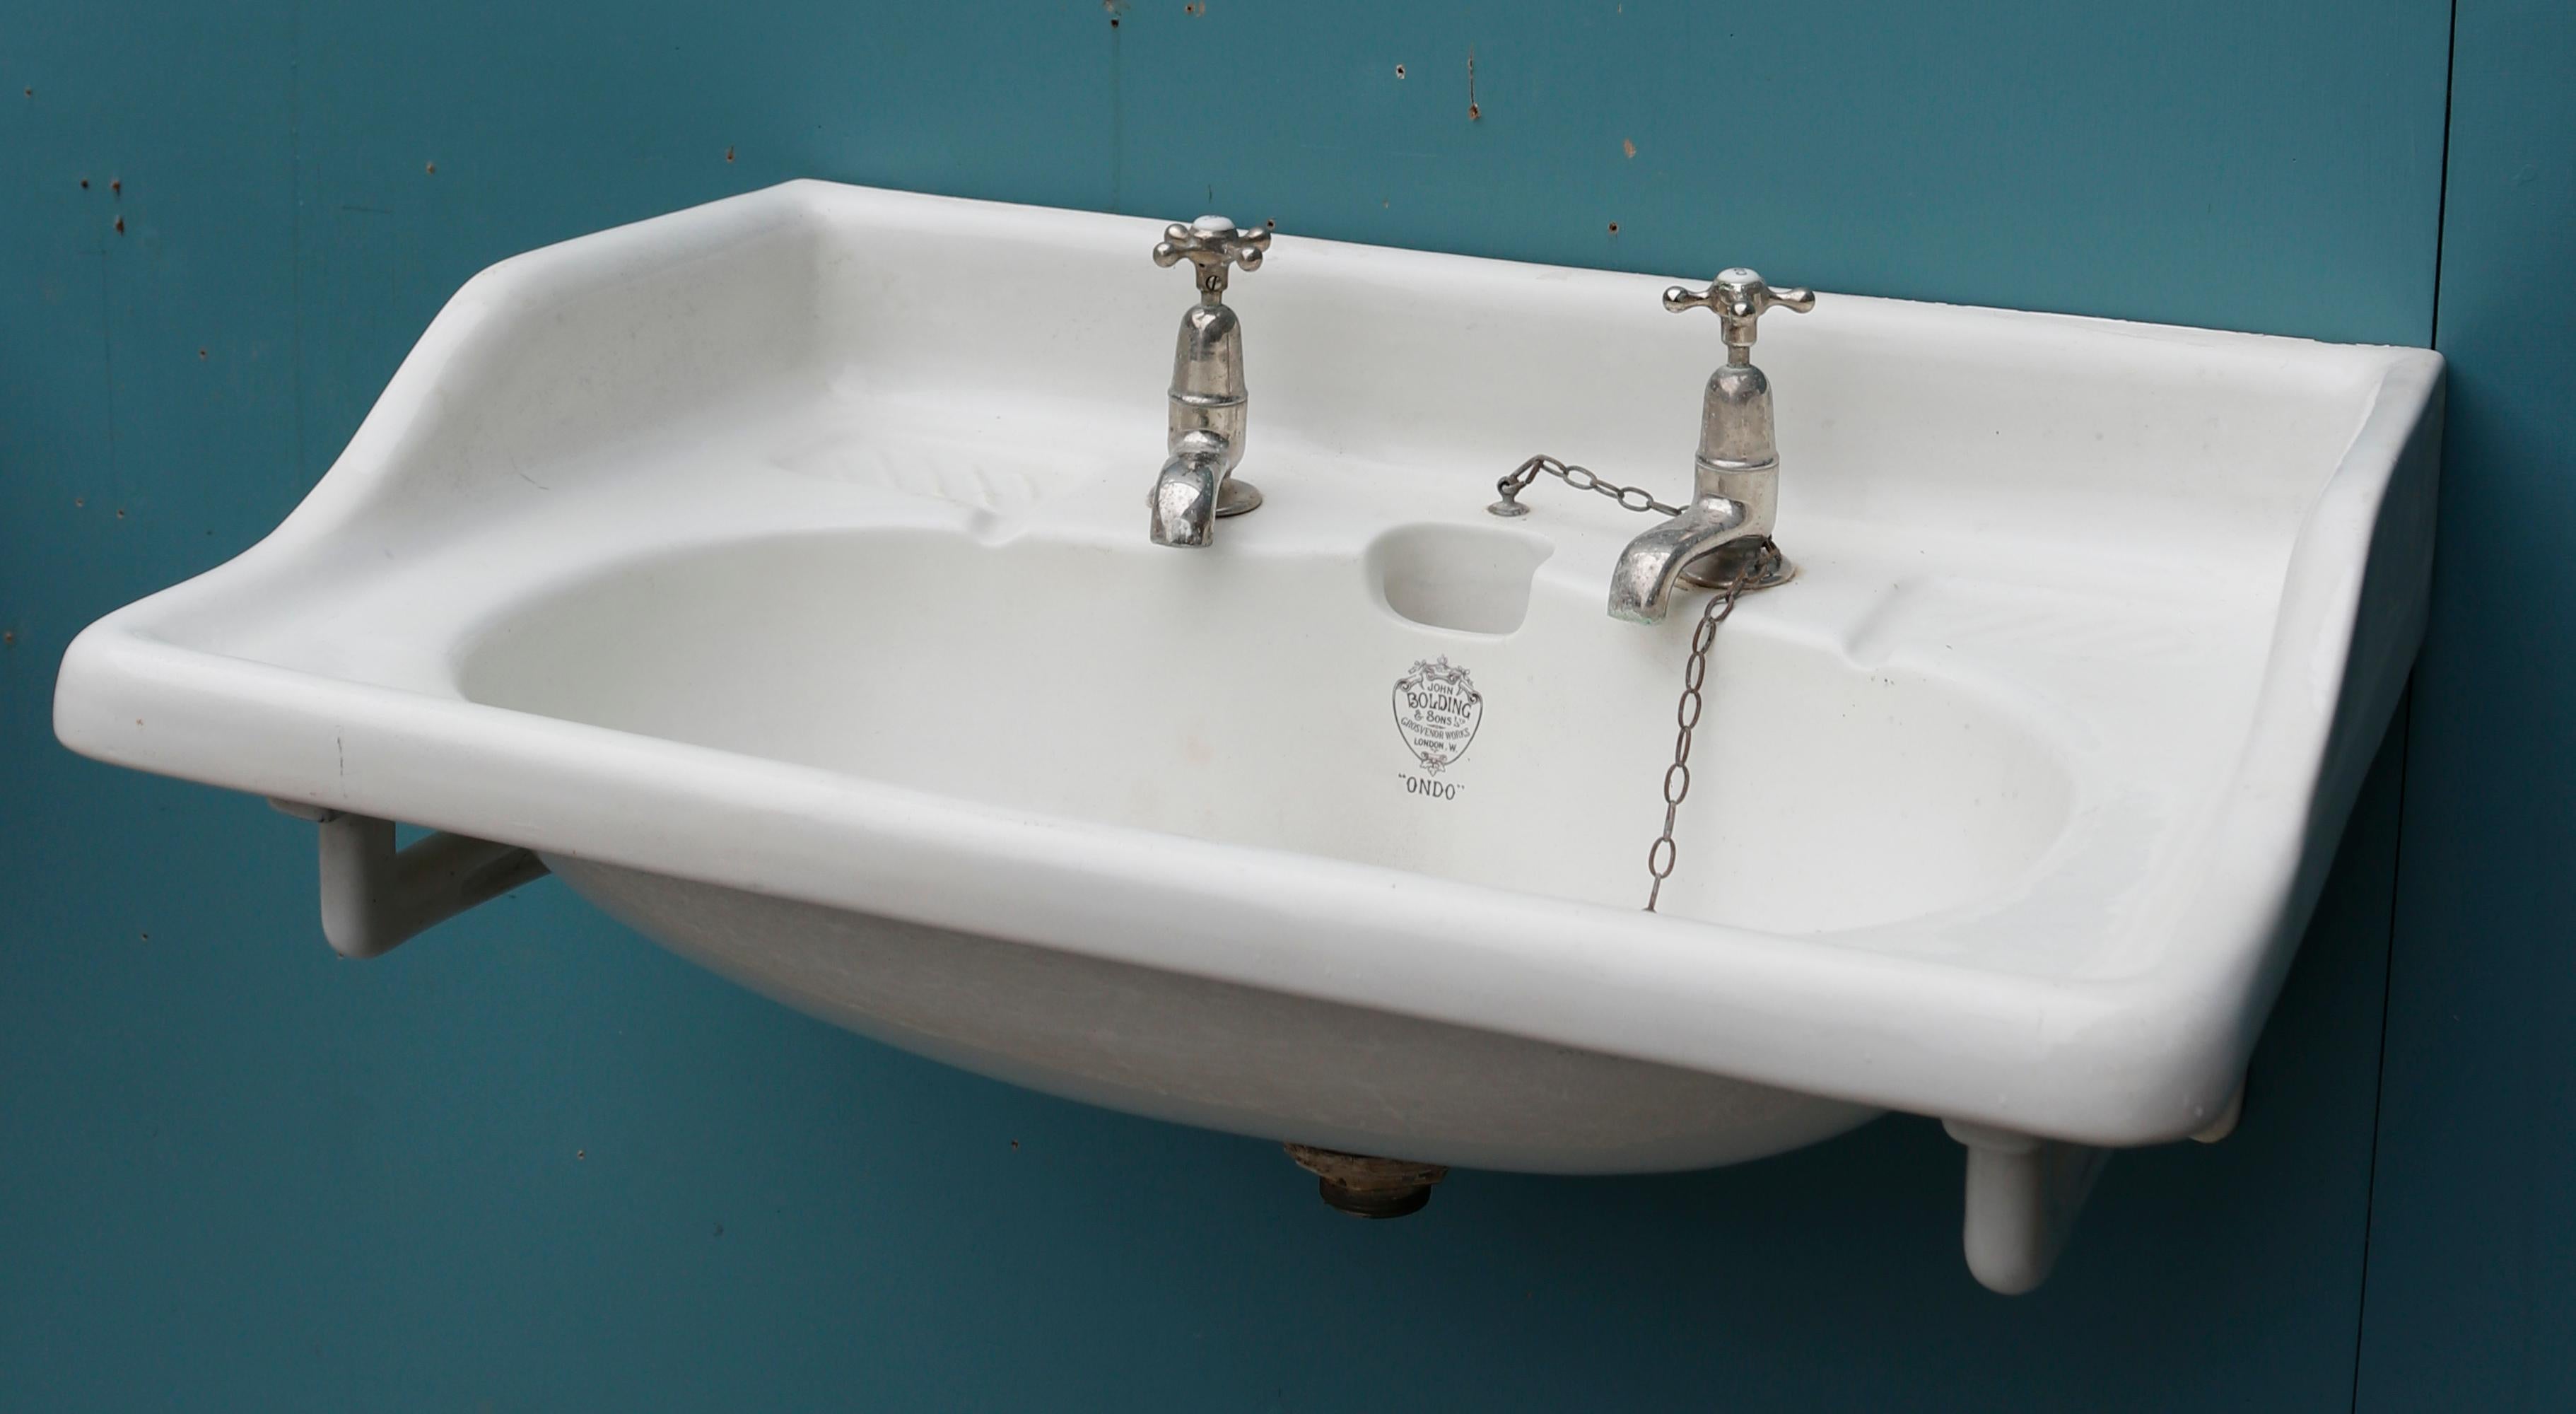 Edwardian Style John Bolding ‘Ondo’ Wash Basin In Good Condition For Sale In Wormelow, Herefordshire